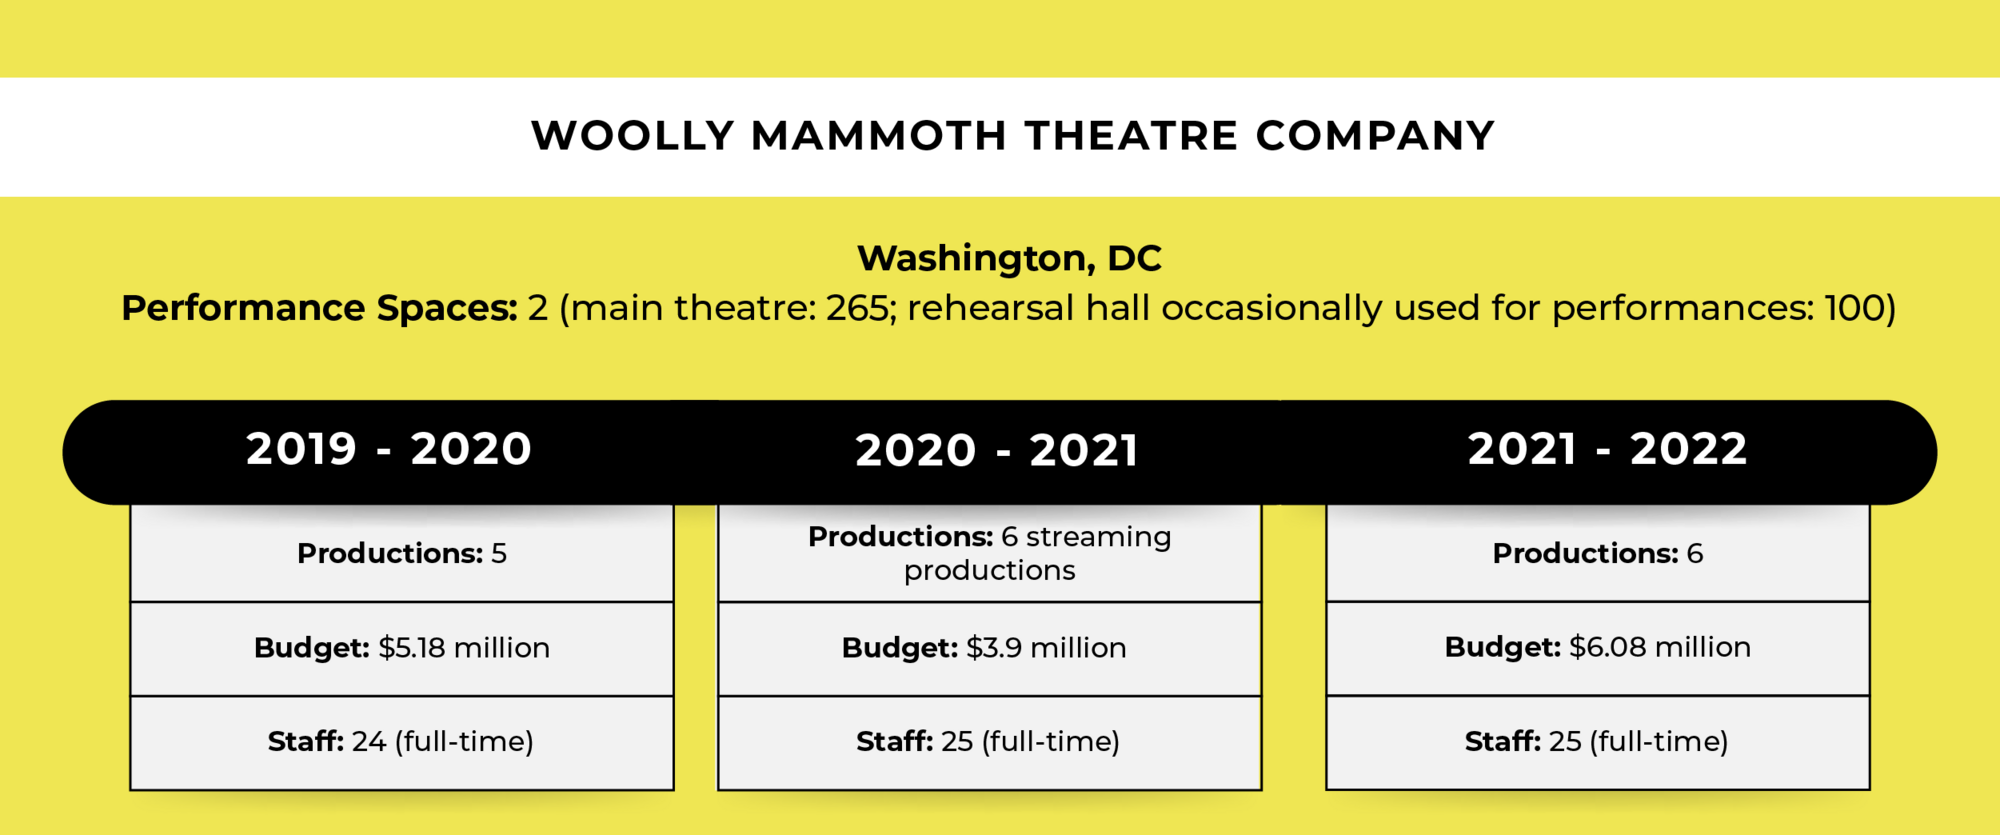 A chart showing Wooly Mammoth Theatre Company's number of productions, amount of staff and budget between 2019 and 2022, where all three dip in 2020 and all three rise again in 2022.